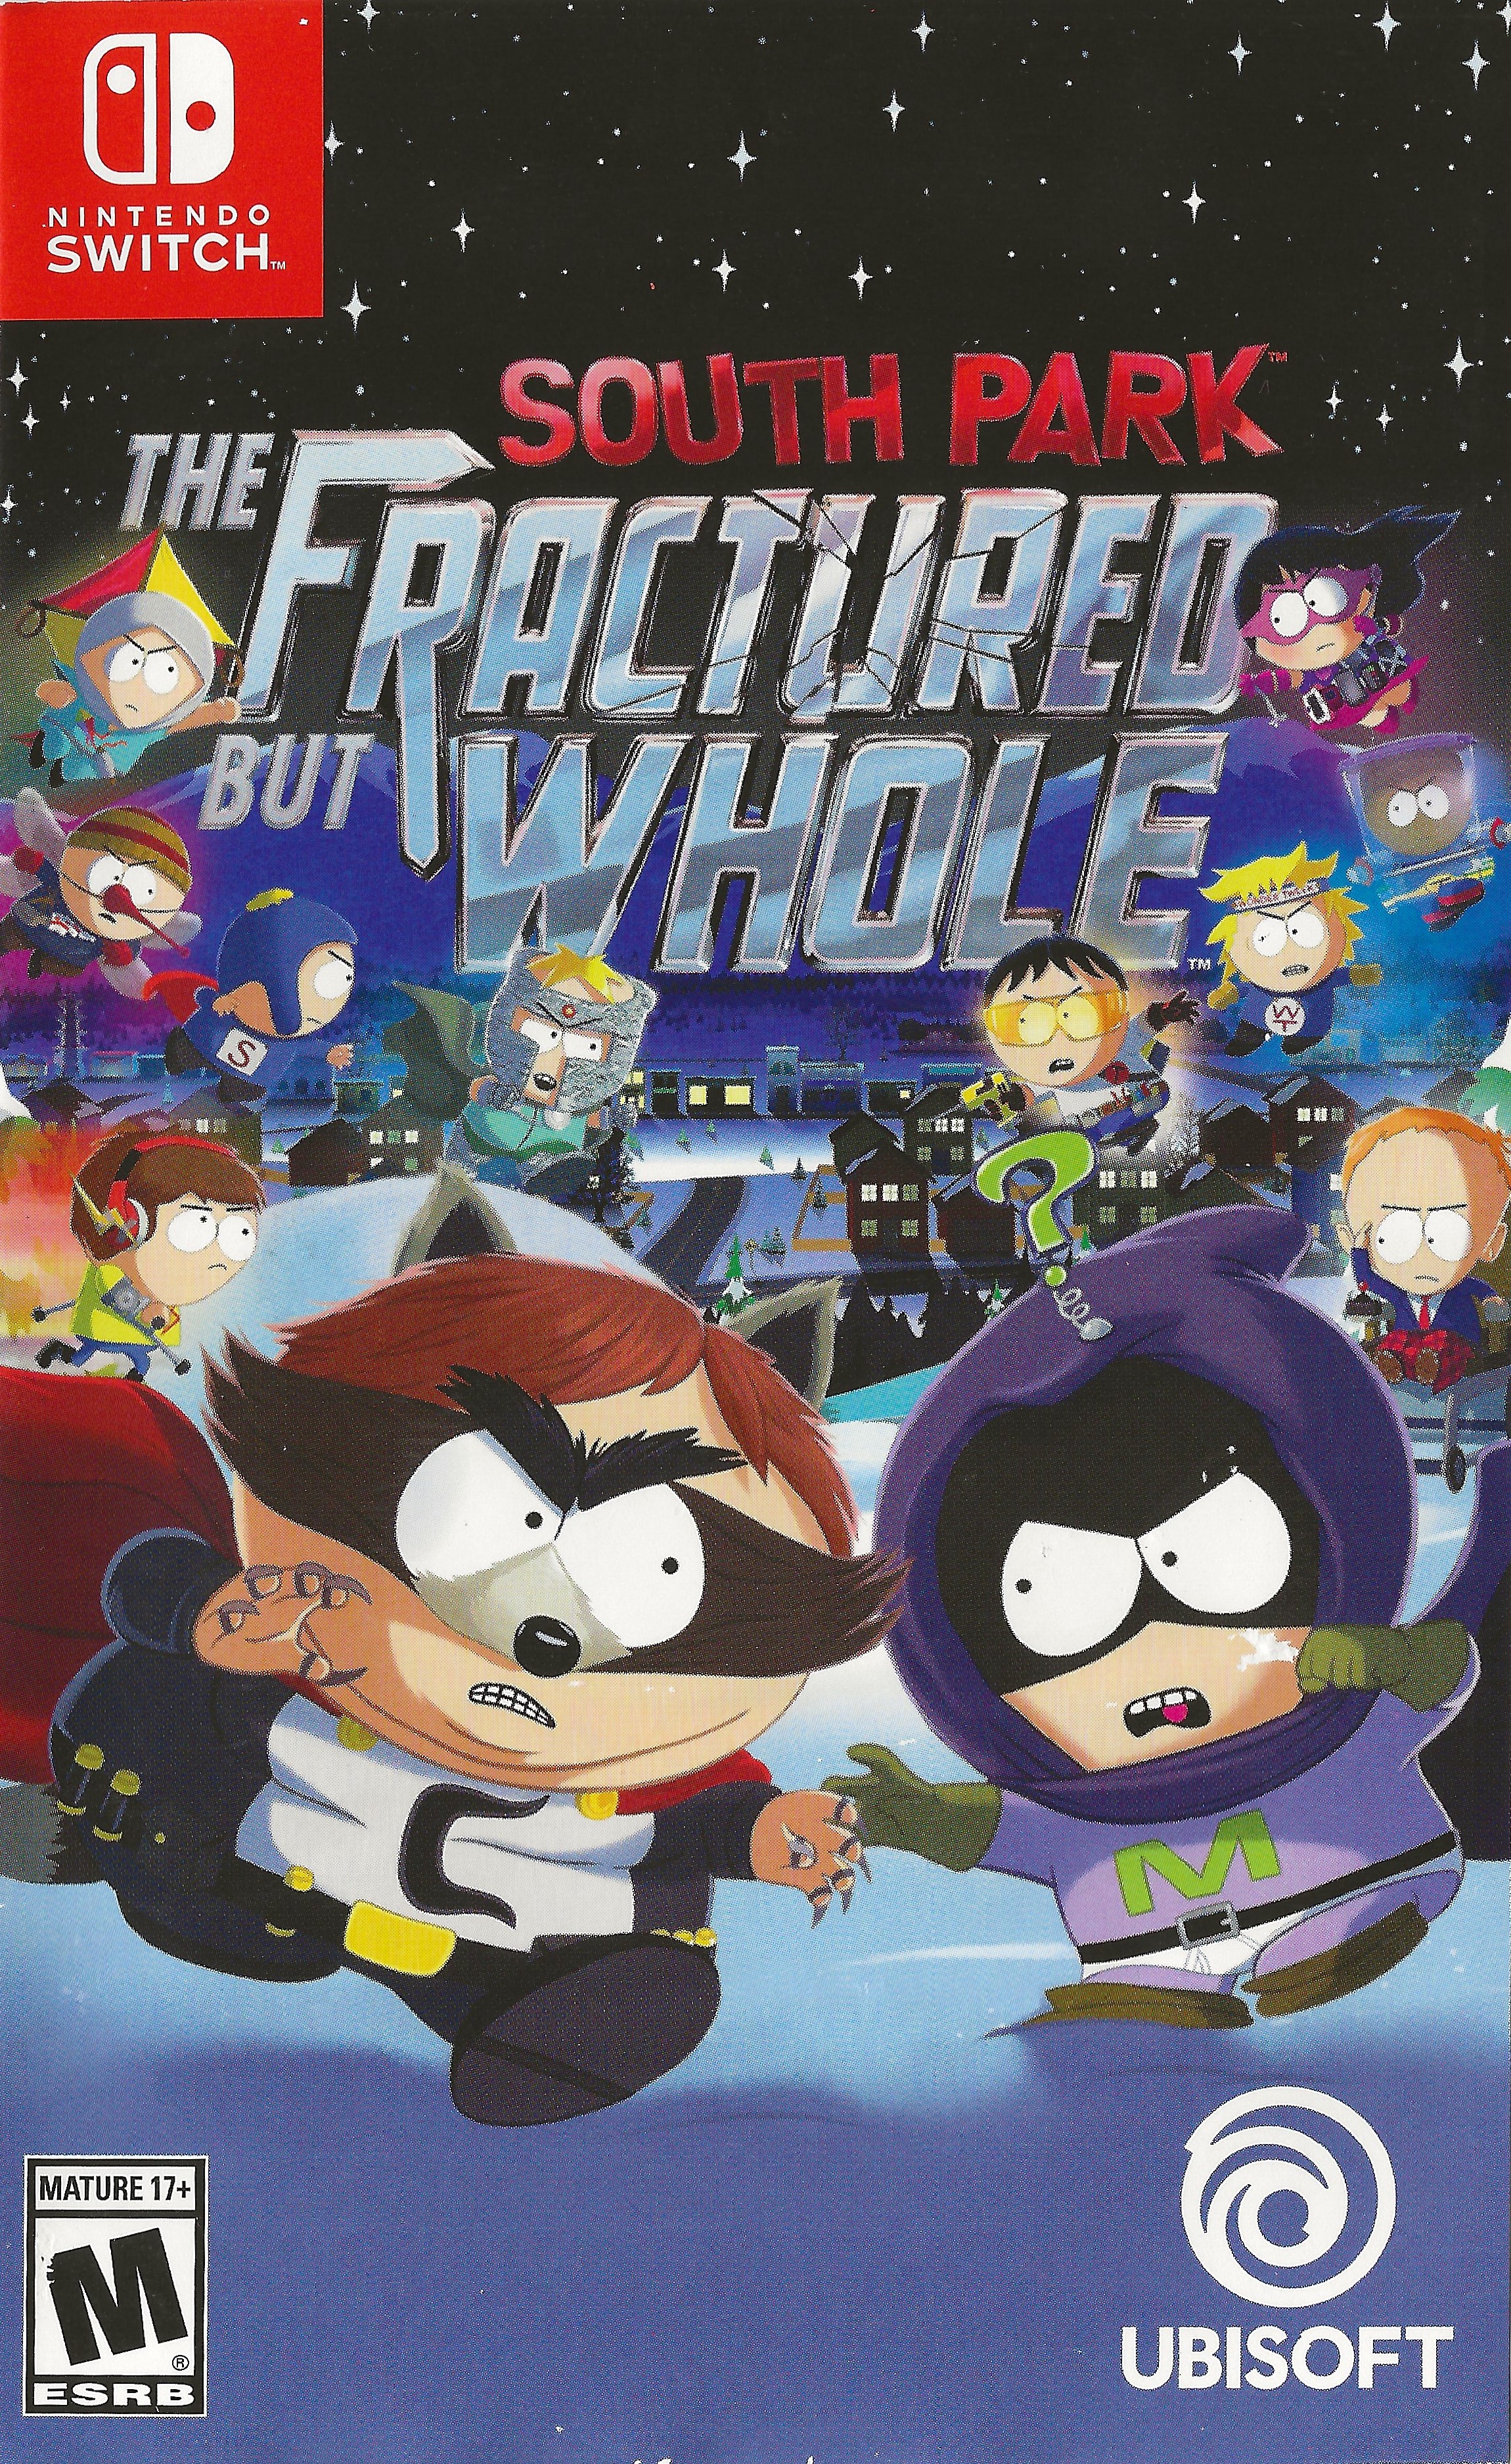 'South Park: The Fractured but Whole'